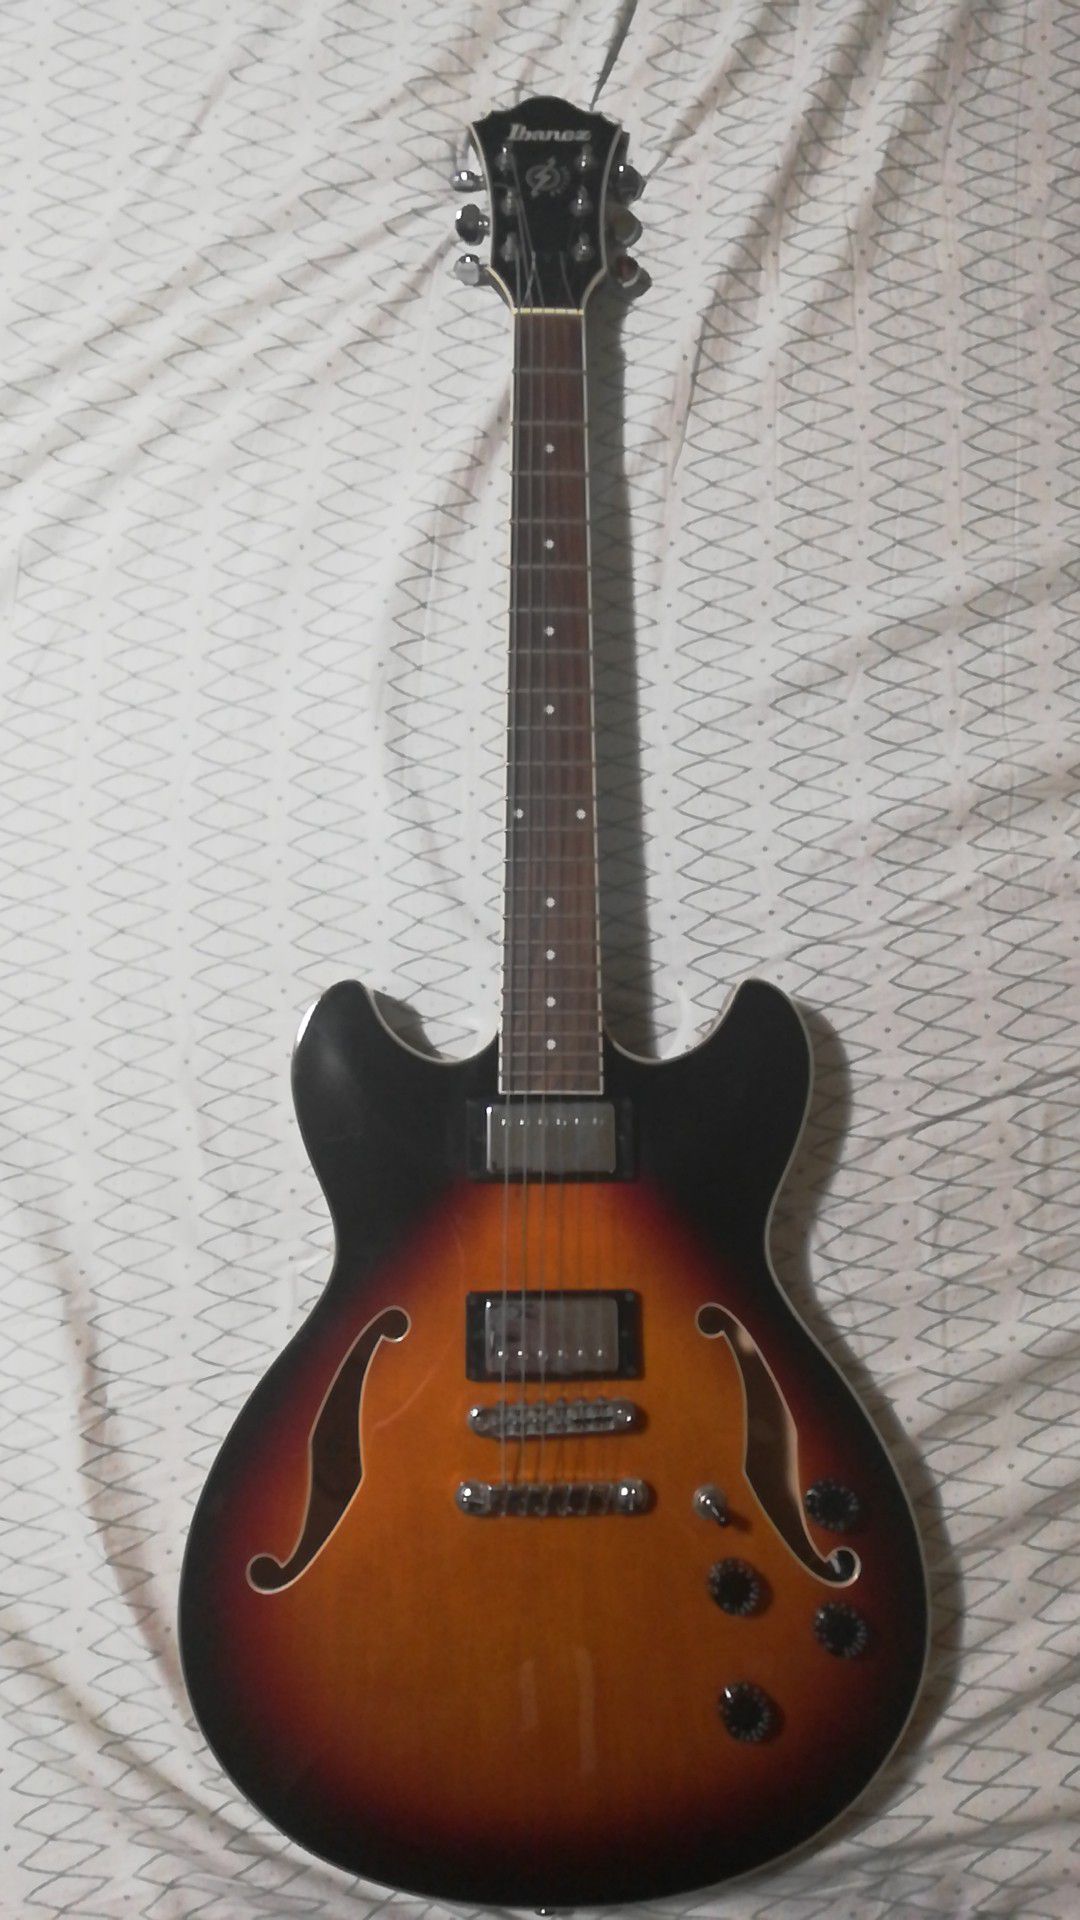 Ibanez artcore as73